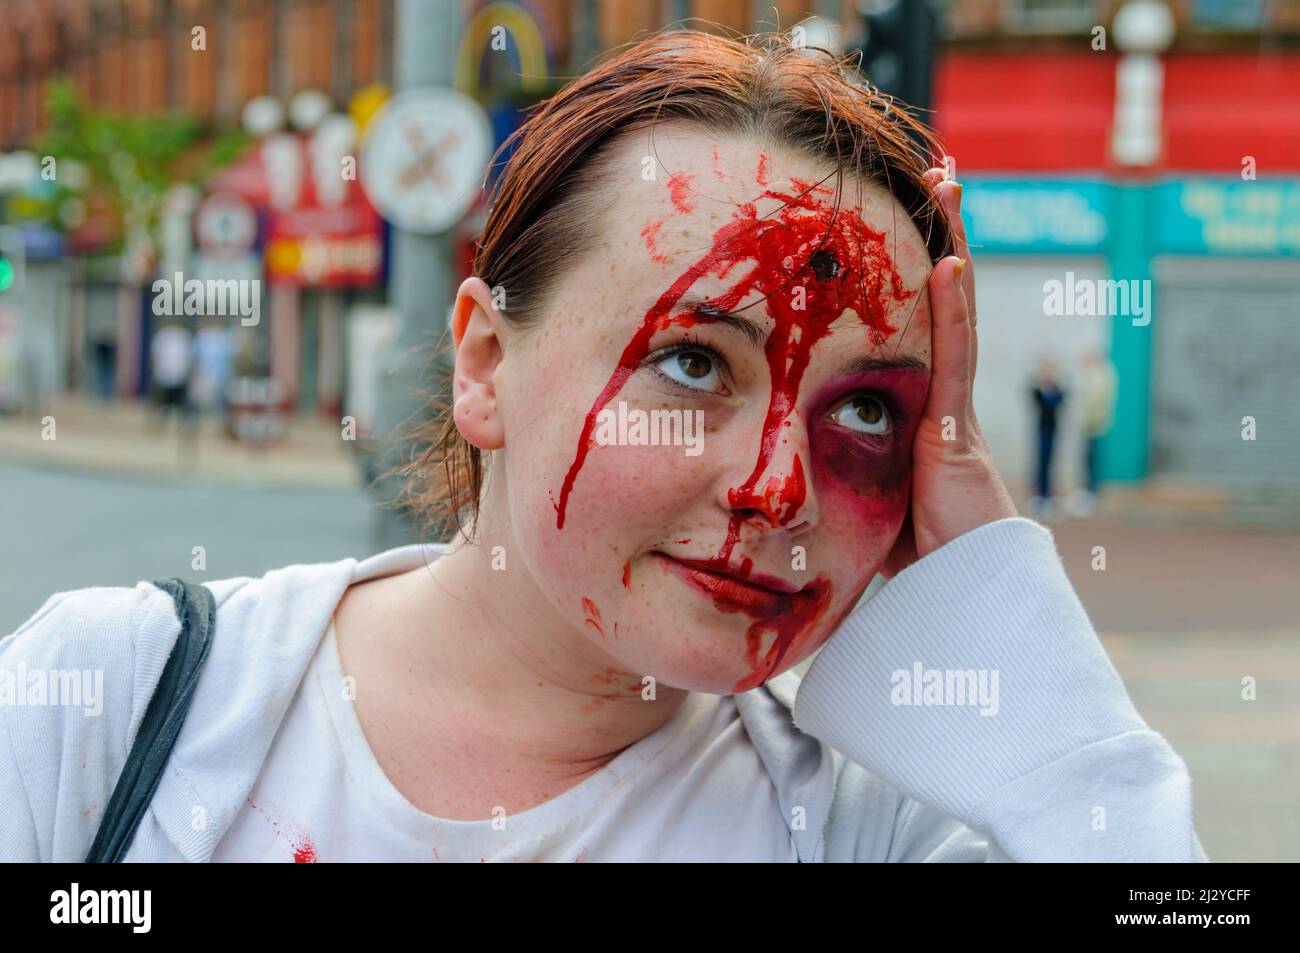 A young lady shows off her make up skills by fabricating a bullet wound on her forehead. Stock Photo